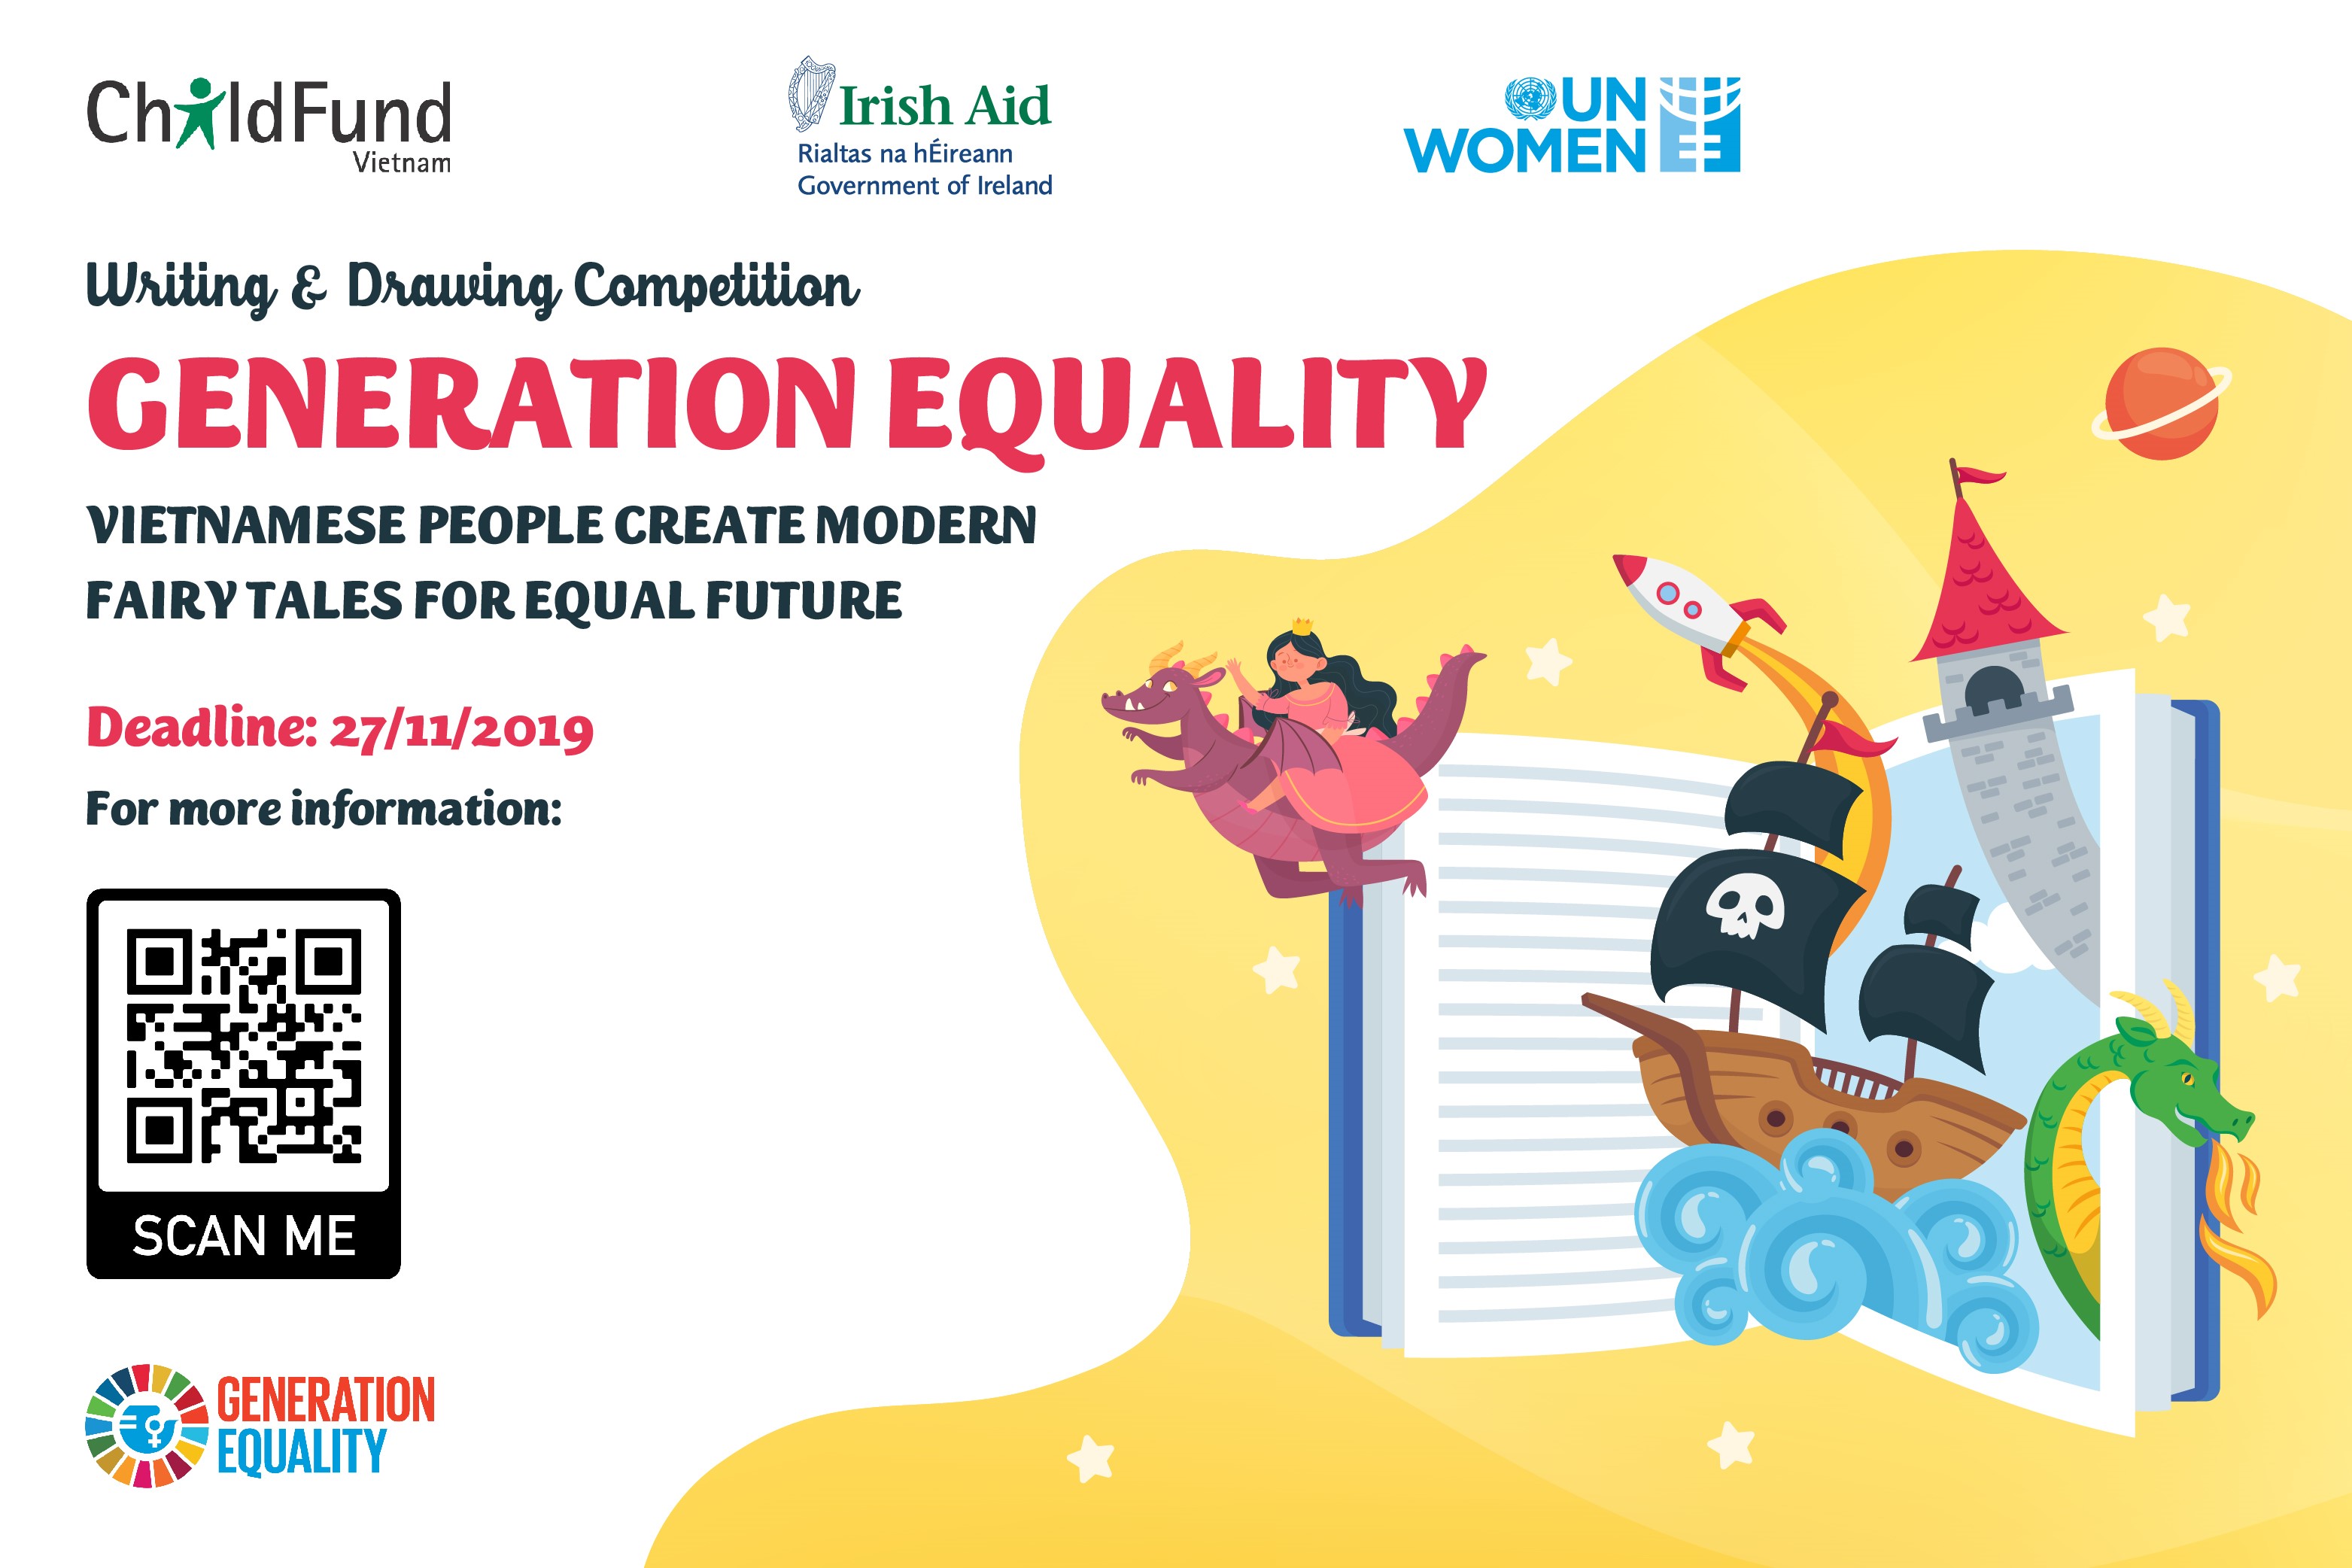 UN Women, Embassy of Ireland and ChildFund Viet Nam are inviting all legal residents in Viet Nam, especially children and the youth, with no age limation, to participate in a new contest to eliminate gender stigma and stereotypes in fairy tales. 